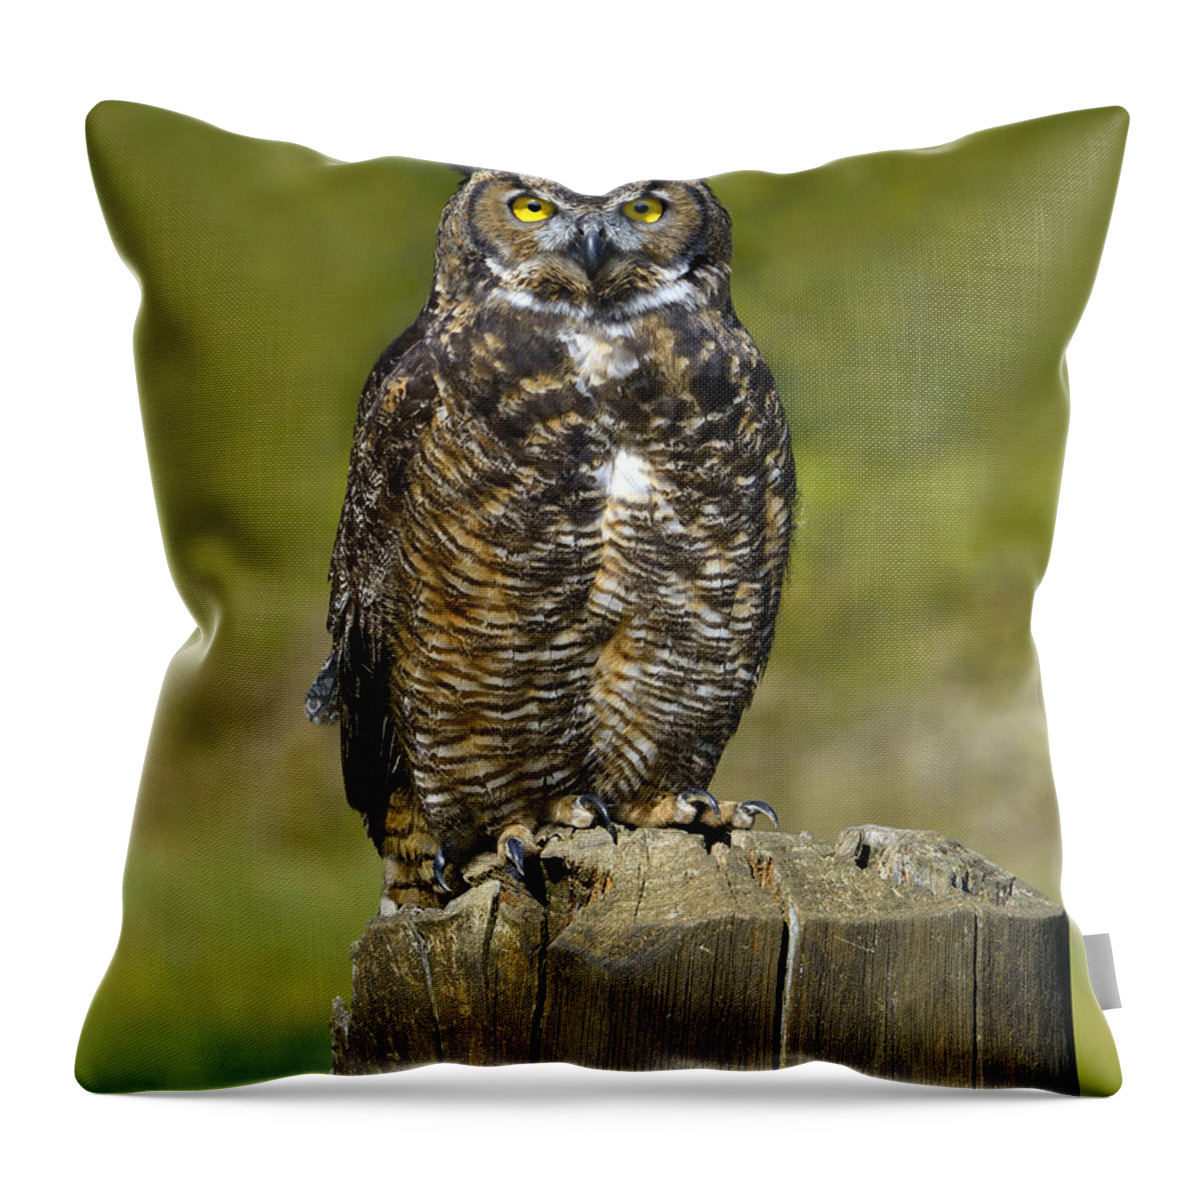 Great Horned Owl Throw Pillow featuring the photograph Great Horned Owl by Tony Beck